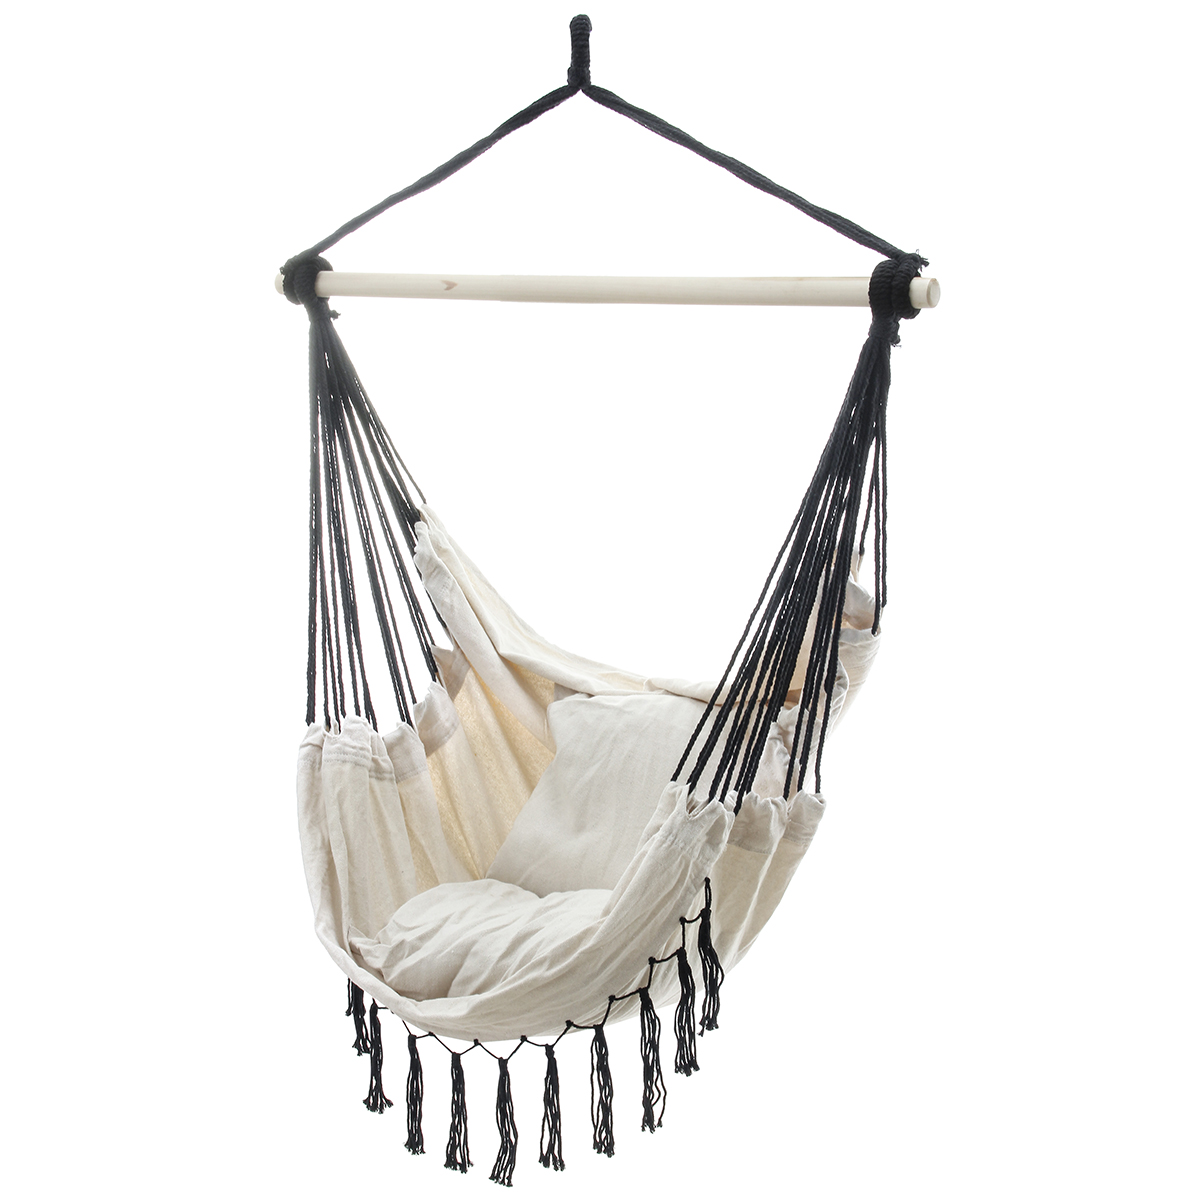 394x512inch-Hammock-Chair-Double-People-Hanging-Swinging-Garden-Swinging-Chair-Camping-Travel-Beach-1742289-4